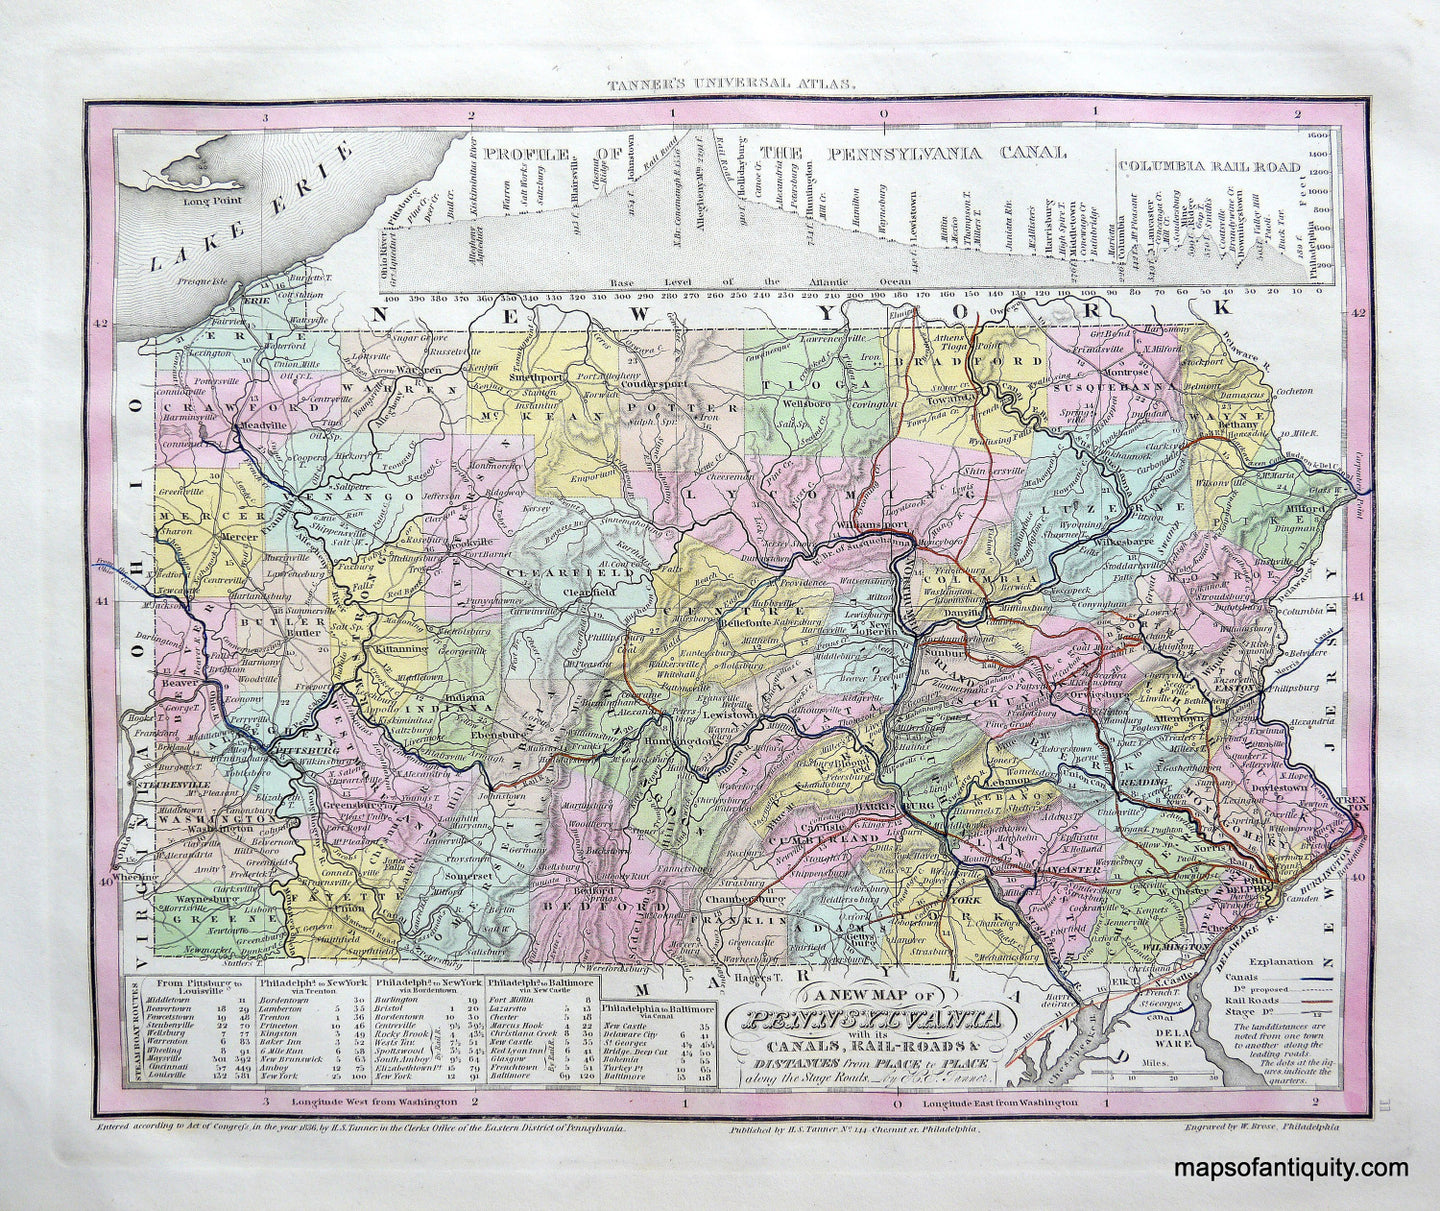 Antique-Hand-Colored-Engraved-Map-A-New-Map-of-Pennsylvania-with-its-Canals-Rail-Roads-&-Distances-from-Place-to-Place-Along-the-Stage-Roads-**********-United-States-Pennsylvania-1836-Tanner-Maps-Of-Antiquity